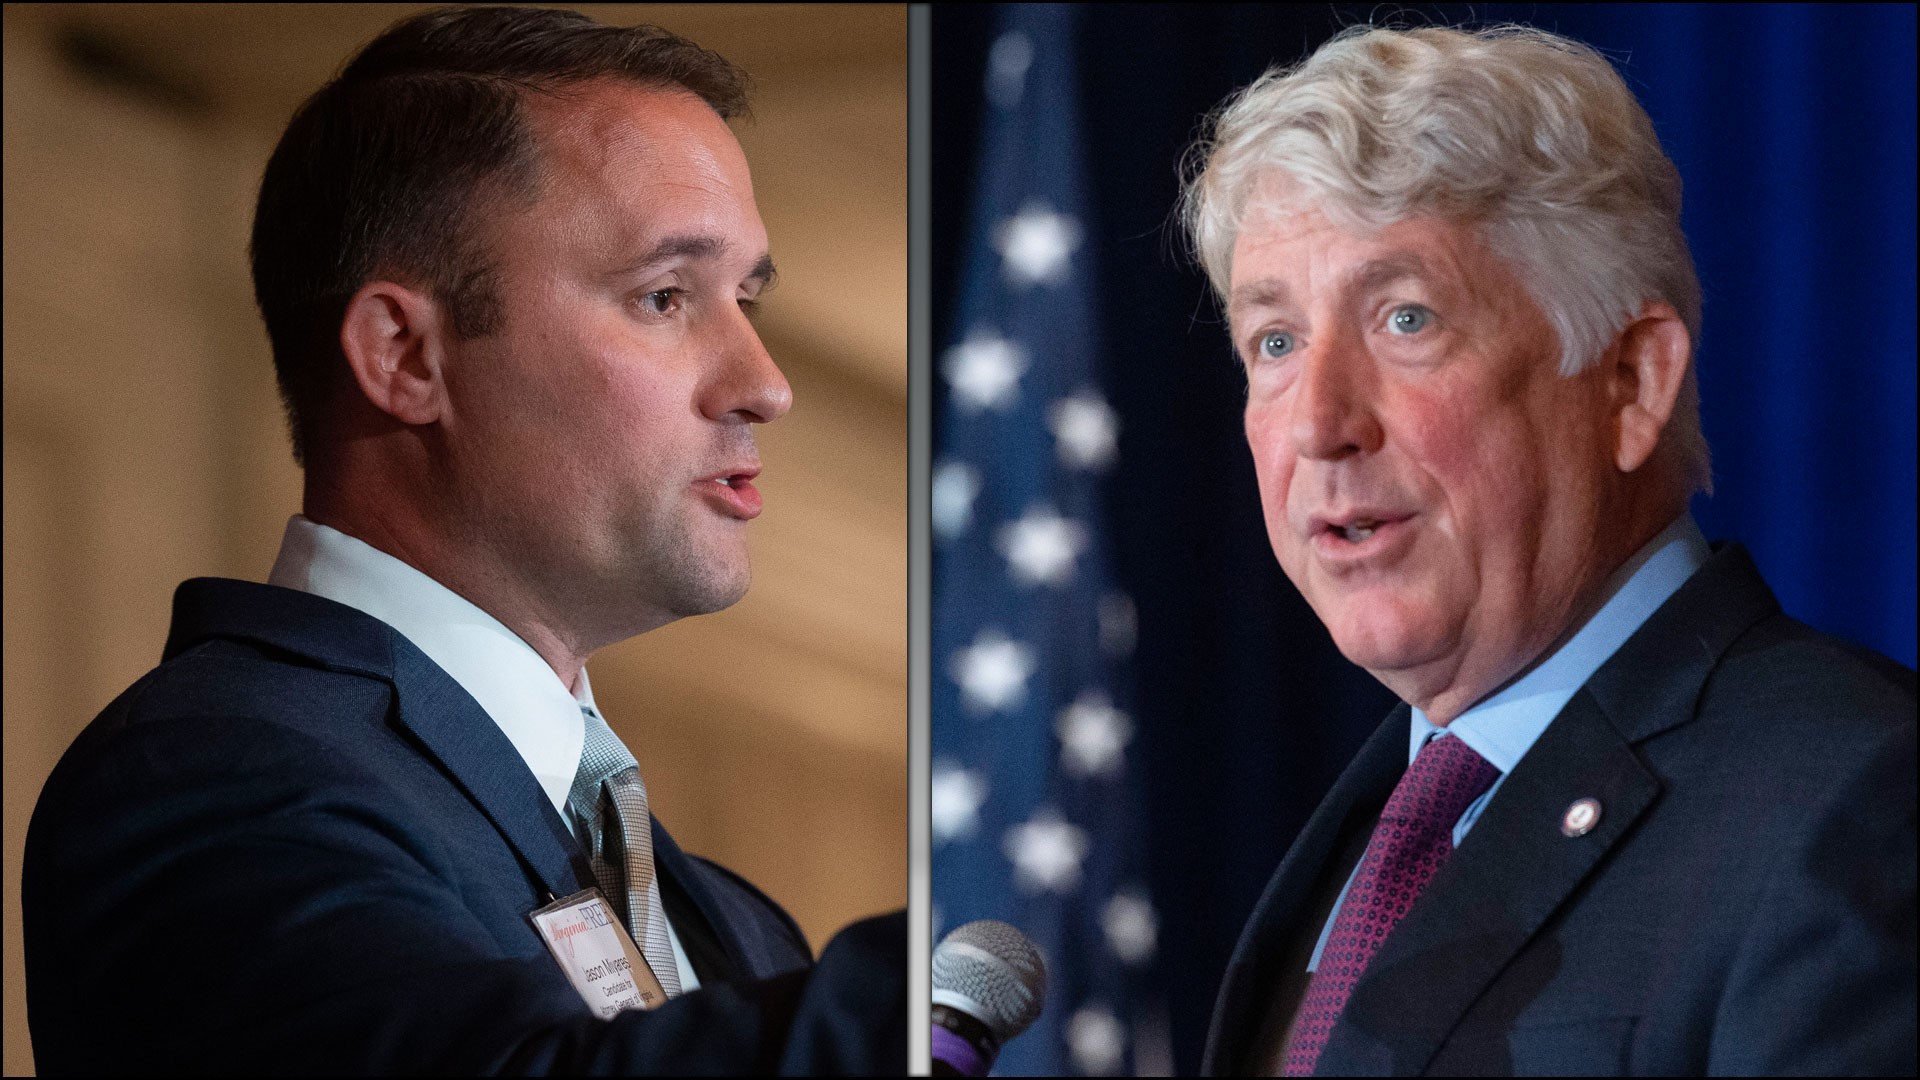 Democrat Mark Herring has held the position since January 2014, having been elected twice. He's facing off against Republican Del. Jason Miyares.